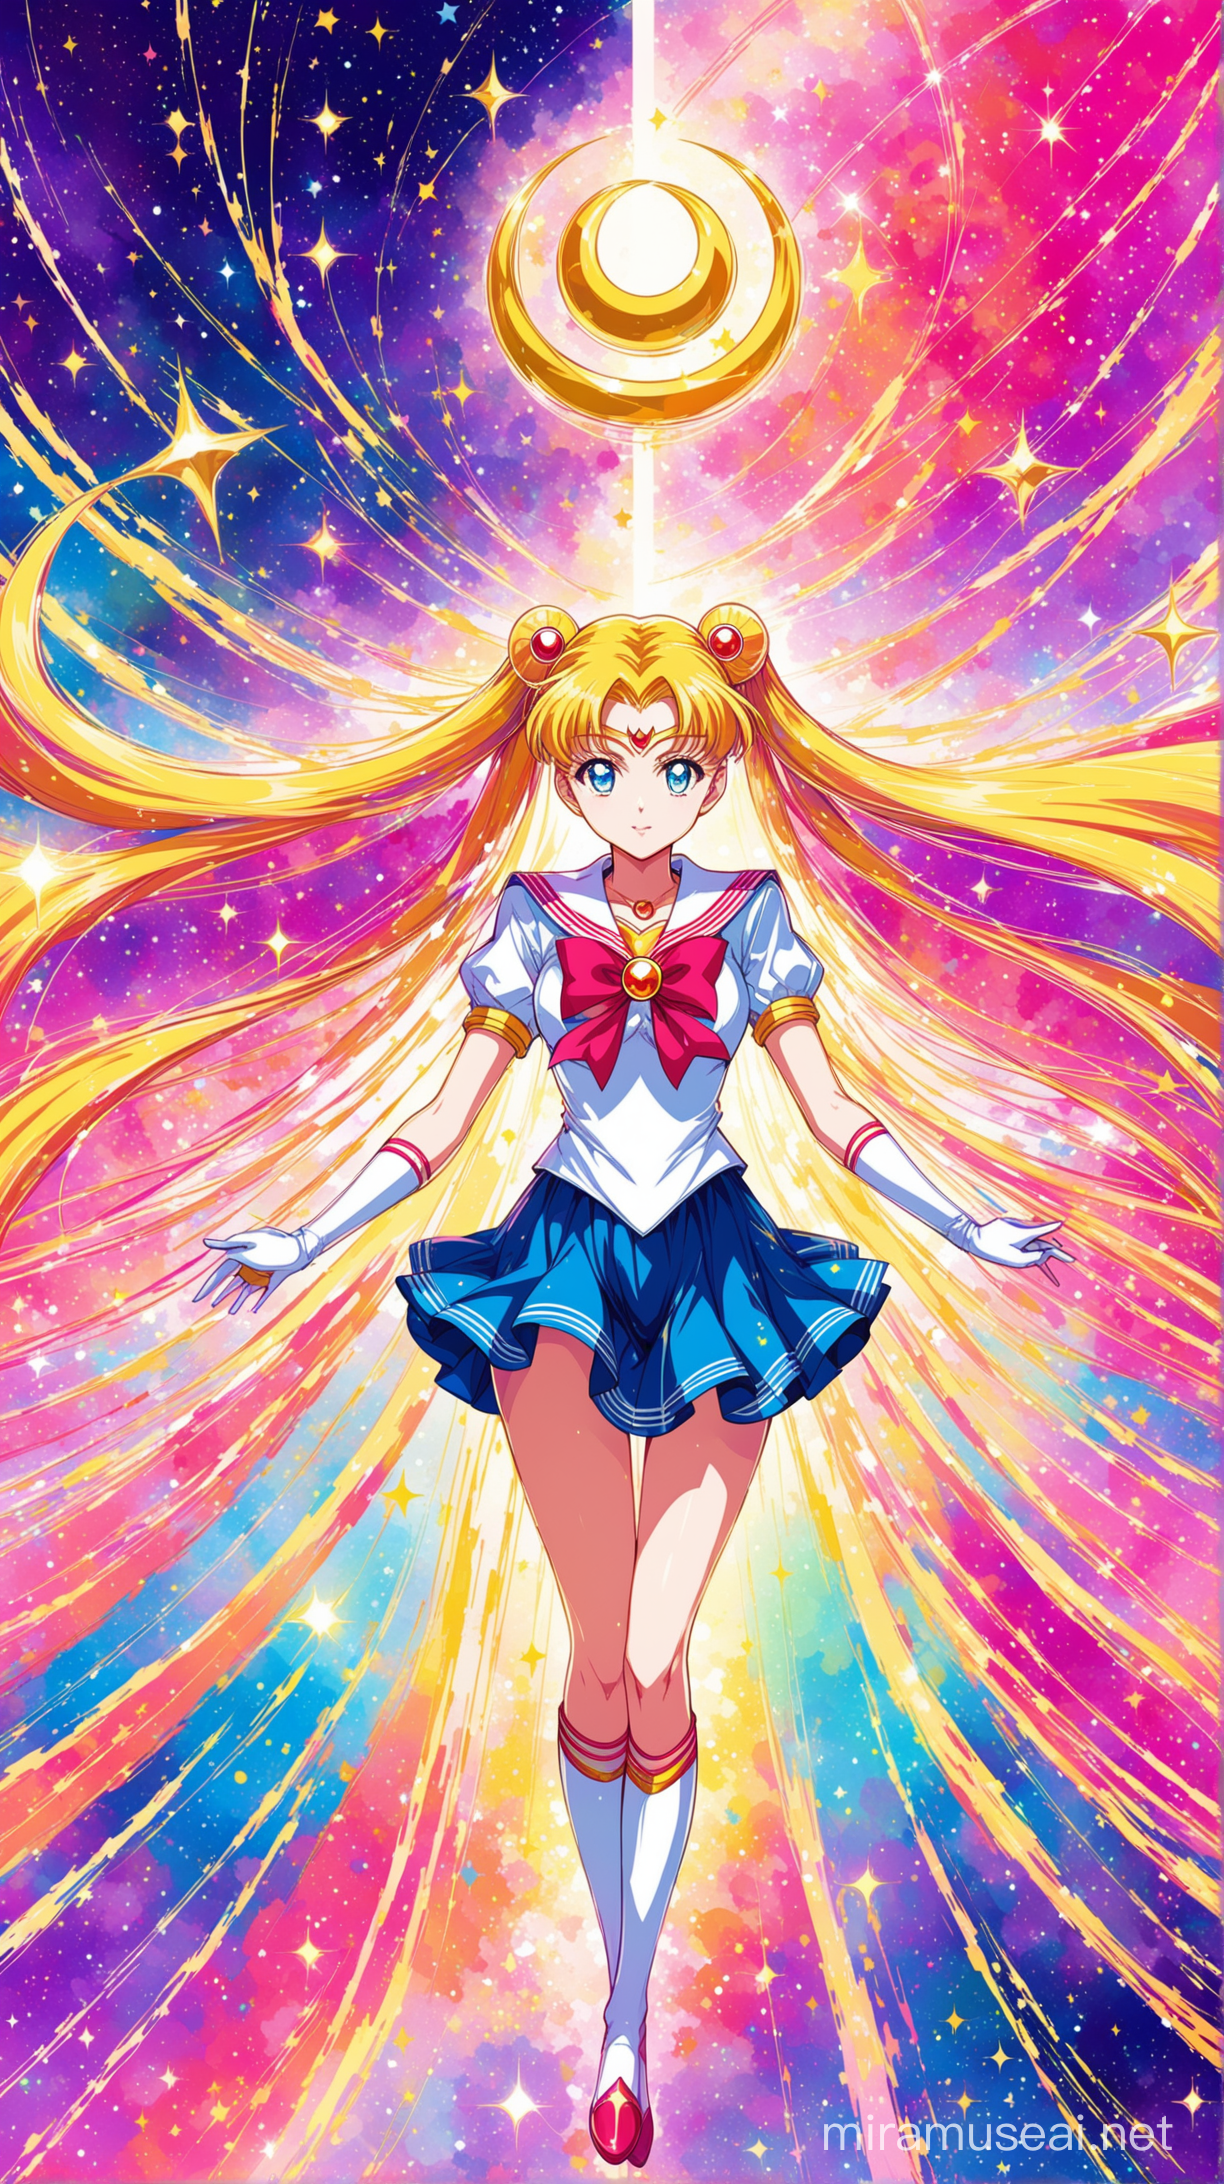 sailor moon abstract artwork that showcases the element of the show but don't use the original character